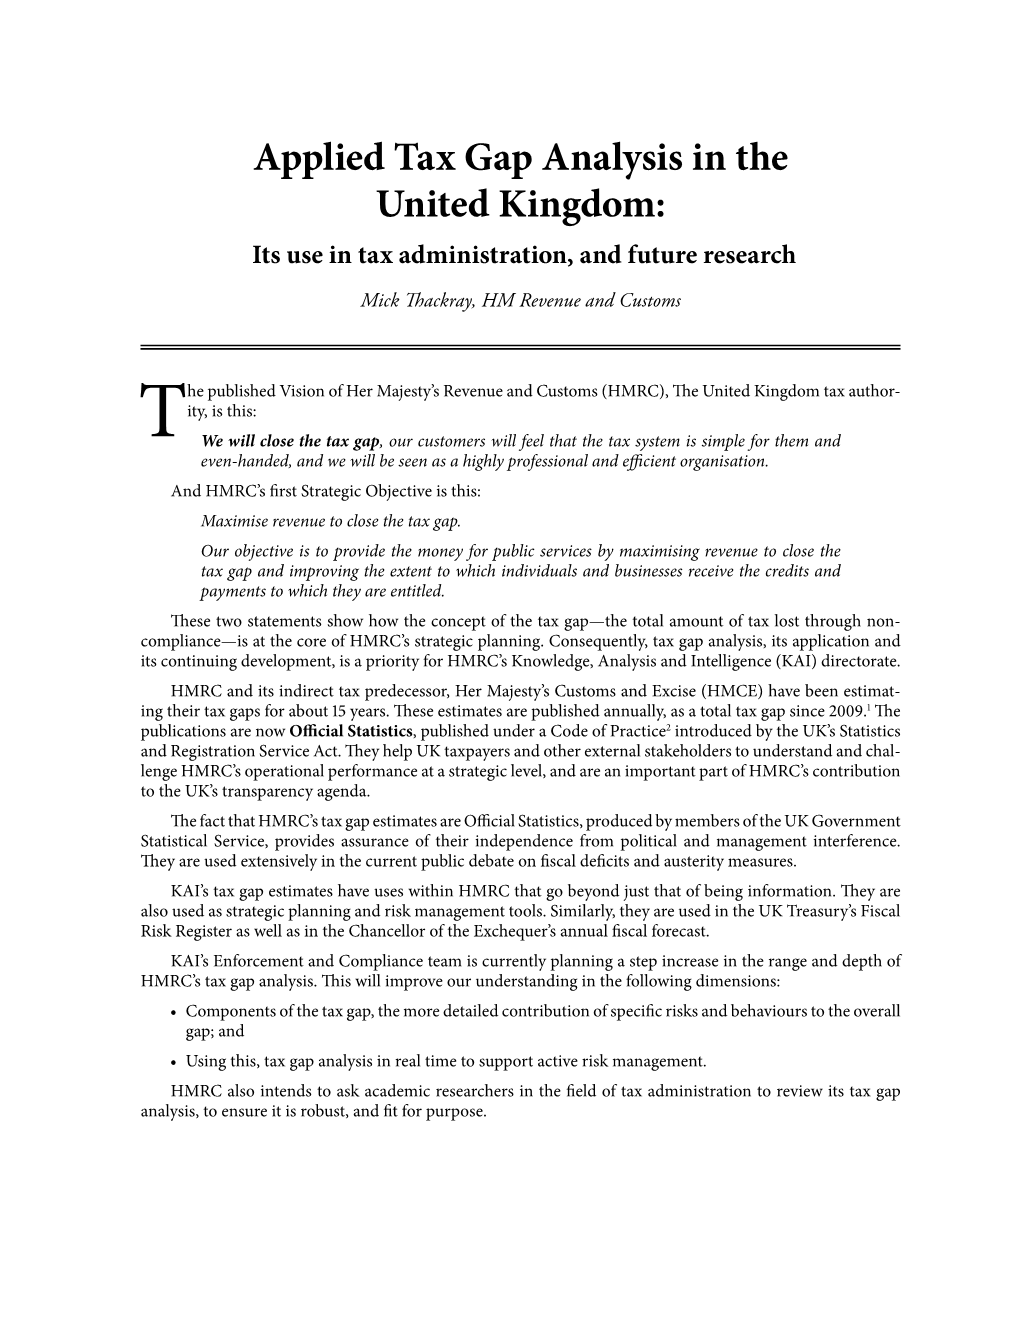 Tax Gap Analysis in the United Kingdom: Its Use in Tax Administration, and Future Research Mick Thackray, HM Revenue and Customs